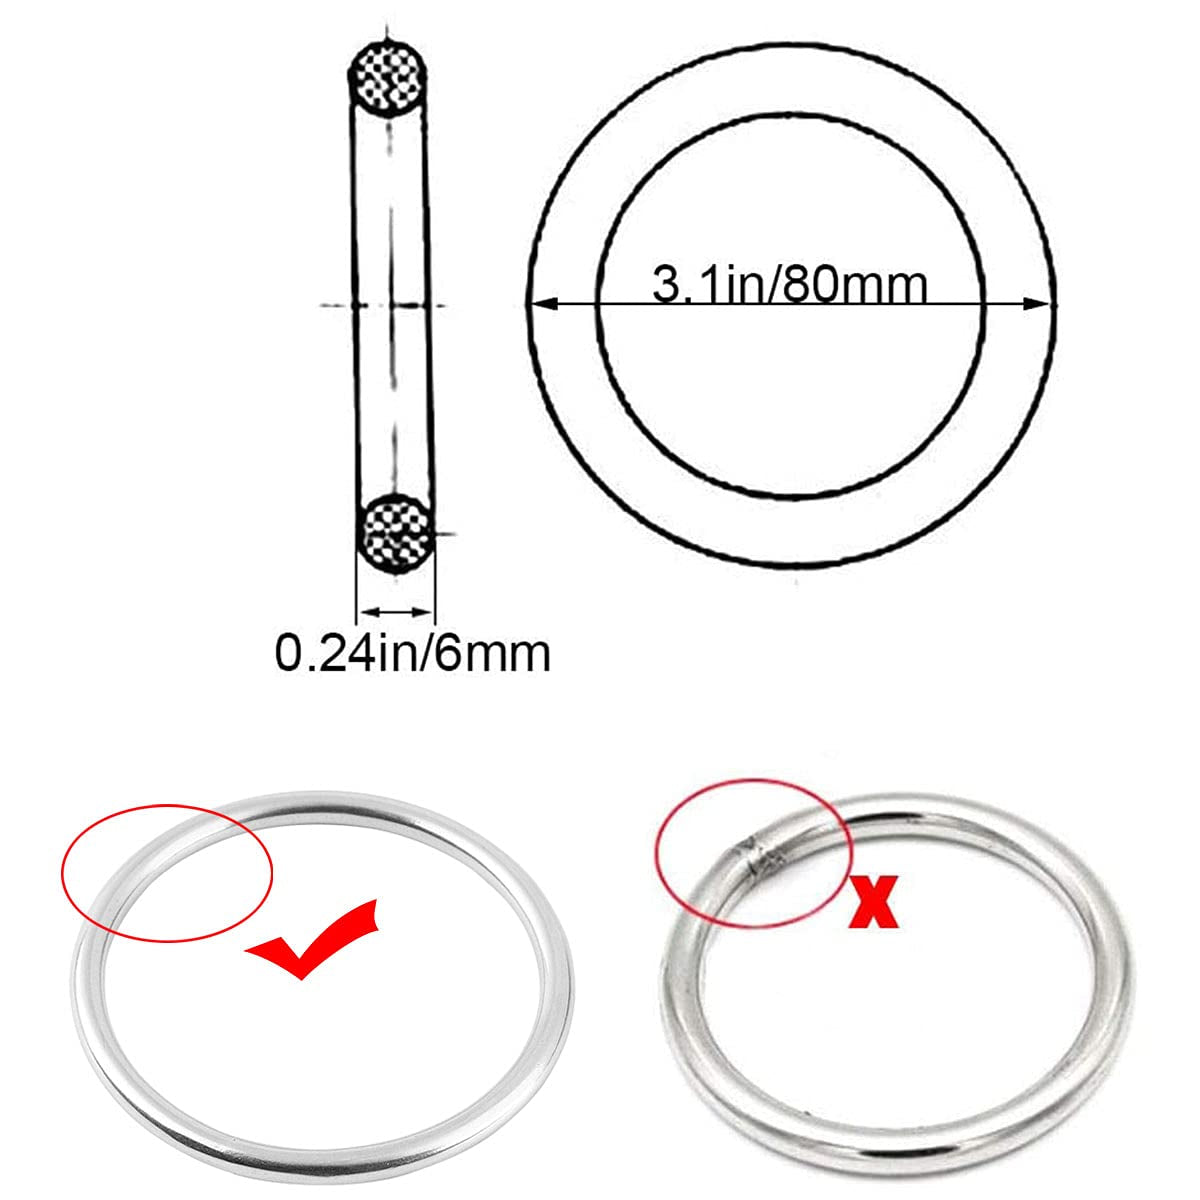 3" Seamless Metal O Ring, 4 Pack 304 Stainless Steel Rings Load 440Lbs, Solid, Heavy Duty Multi-Purpose Metal O-Ring for Macrame,Dog Leashes